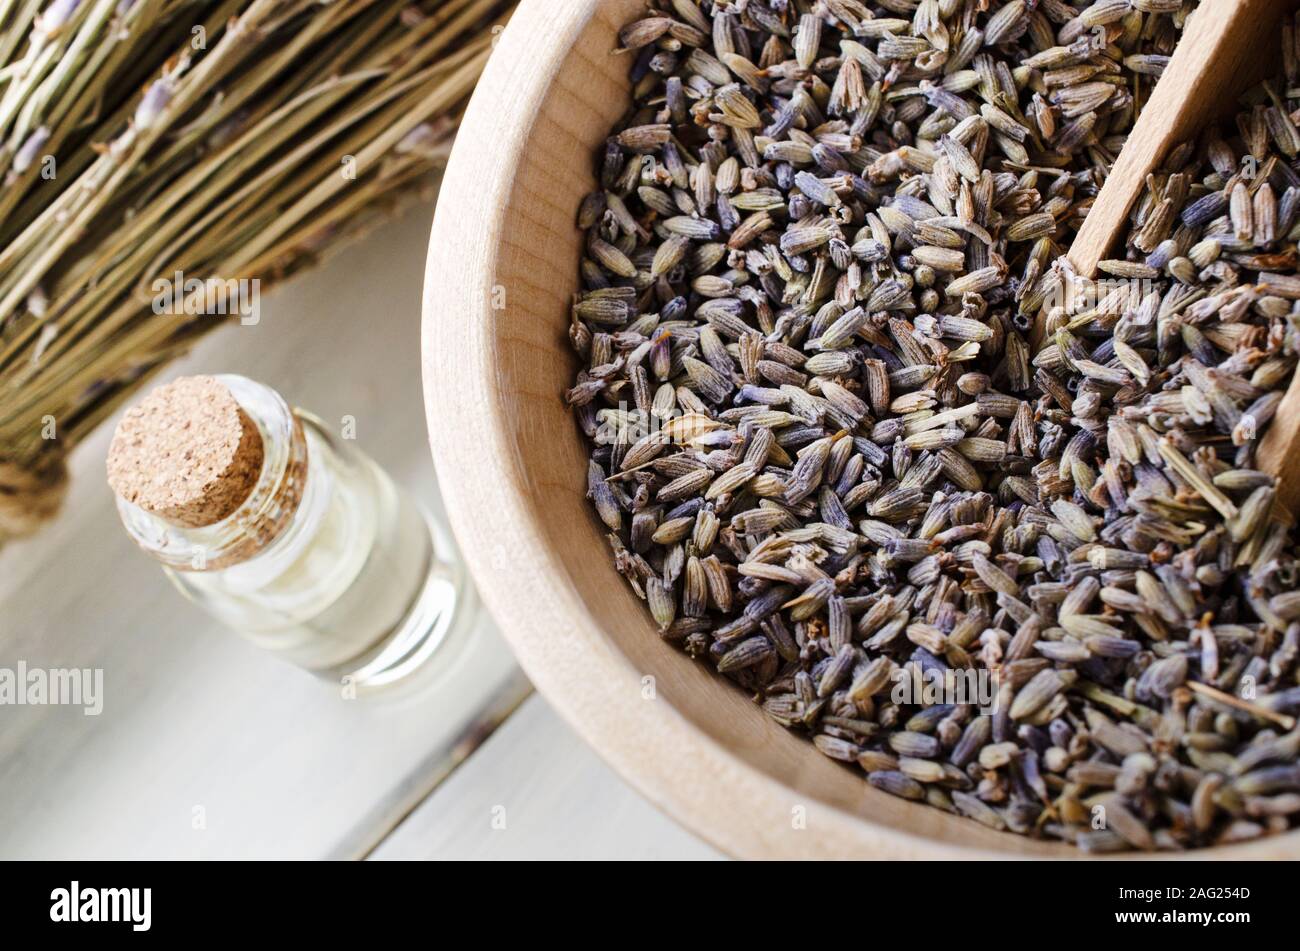 Dried Lavender herbs in wooden bowl with scoop next to essential oil bottle with cork and bunch of flower stems in background. Stock Photo